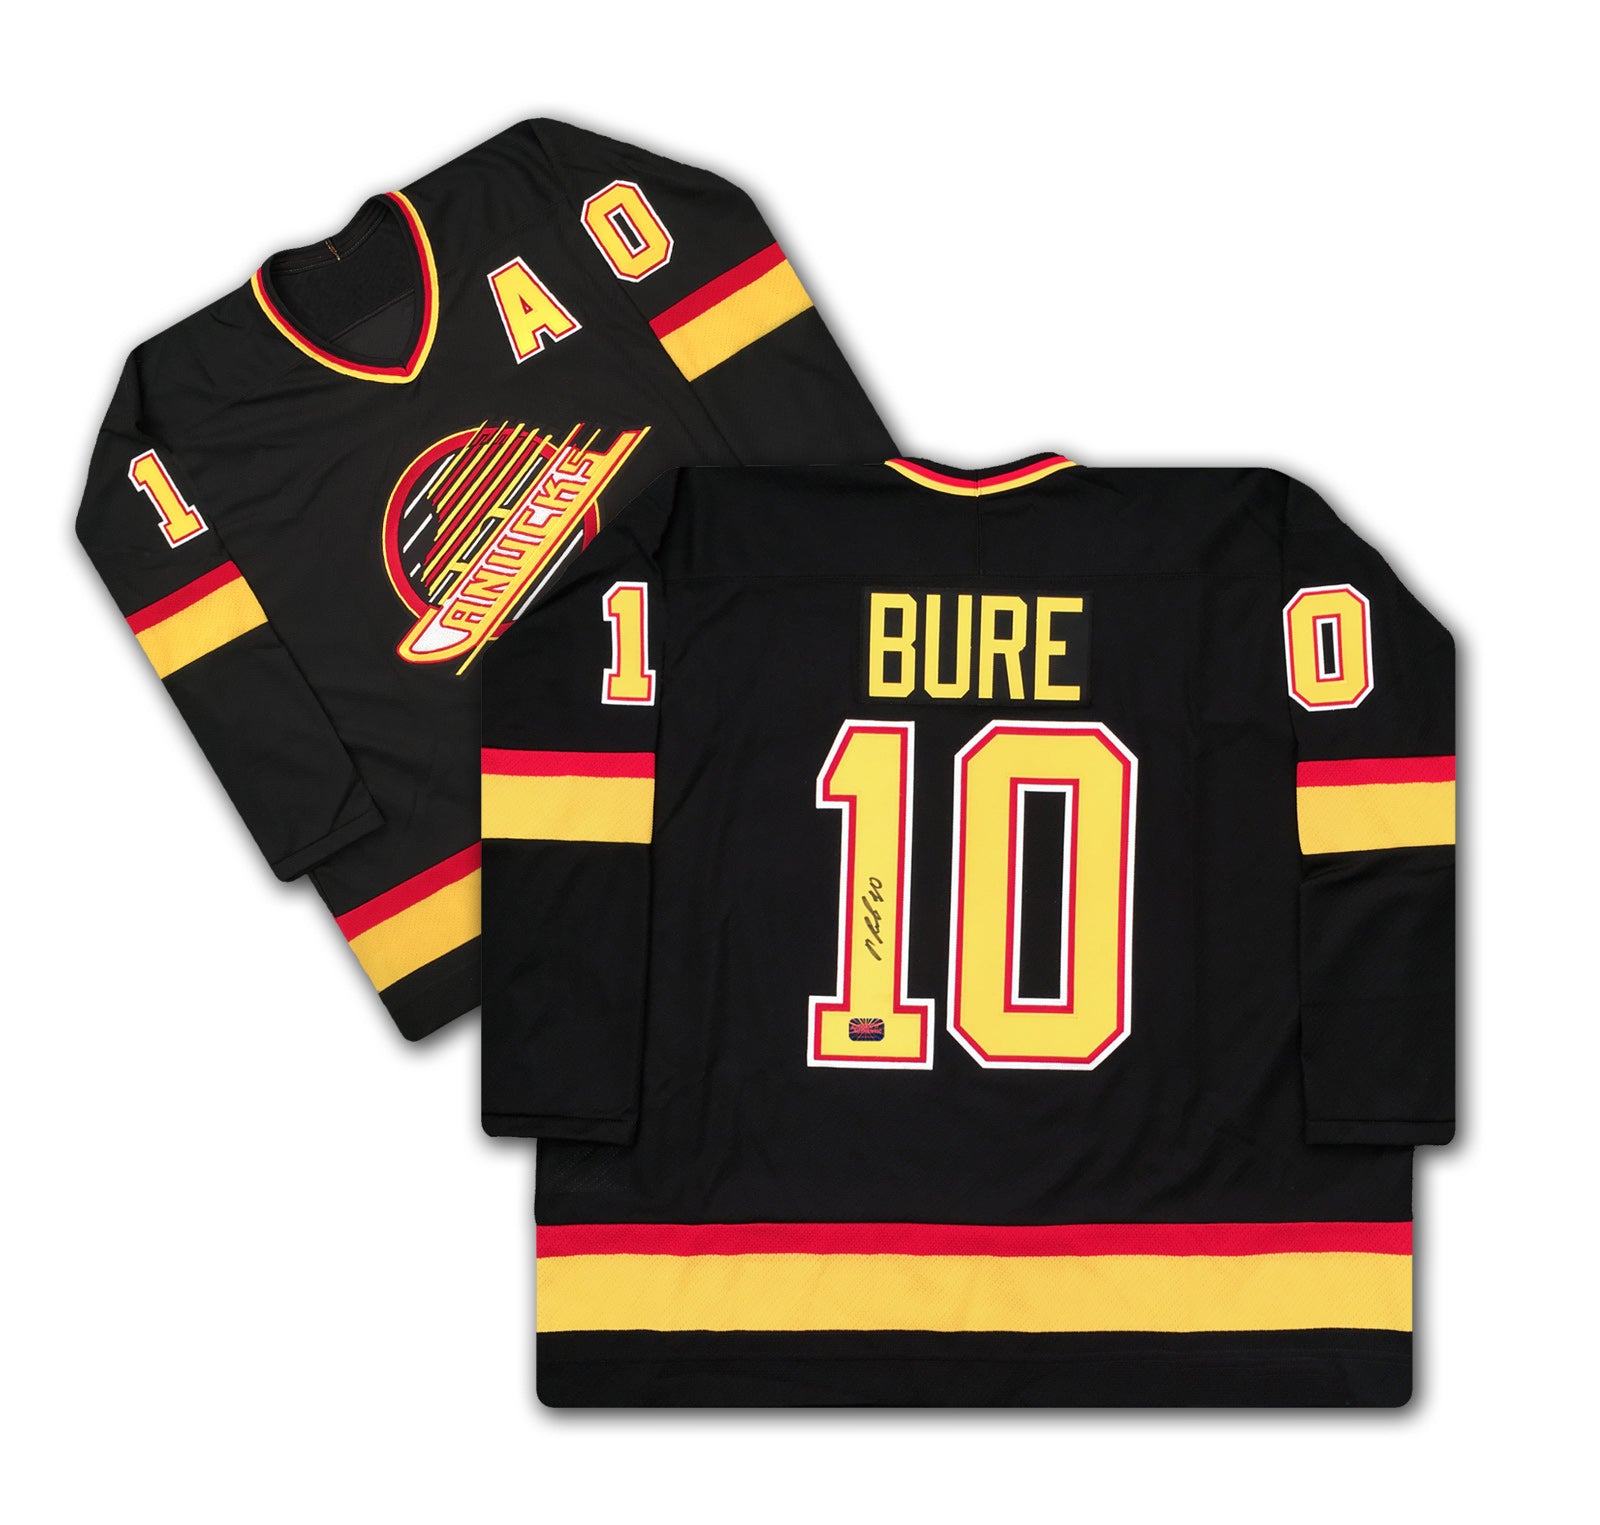 NHL Pavel Bure Signed Jerseys, Collectible Pavel Bure Signed